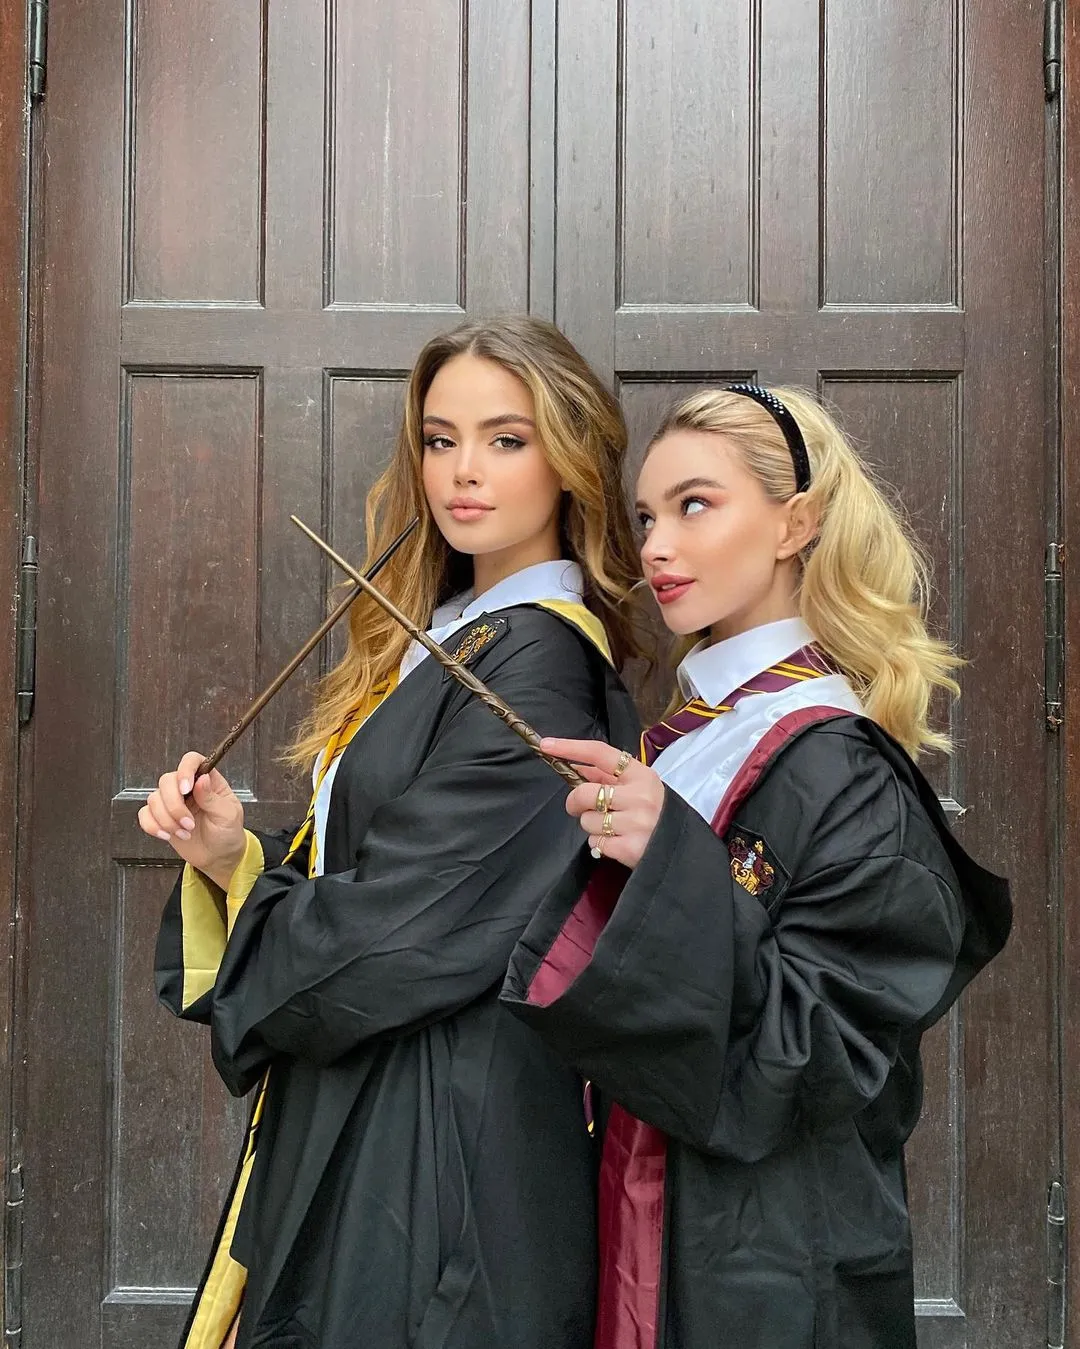 Harry Potter costumes for women